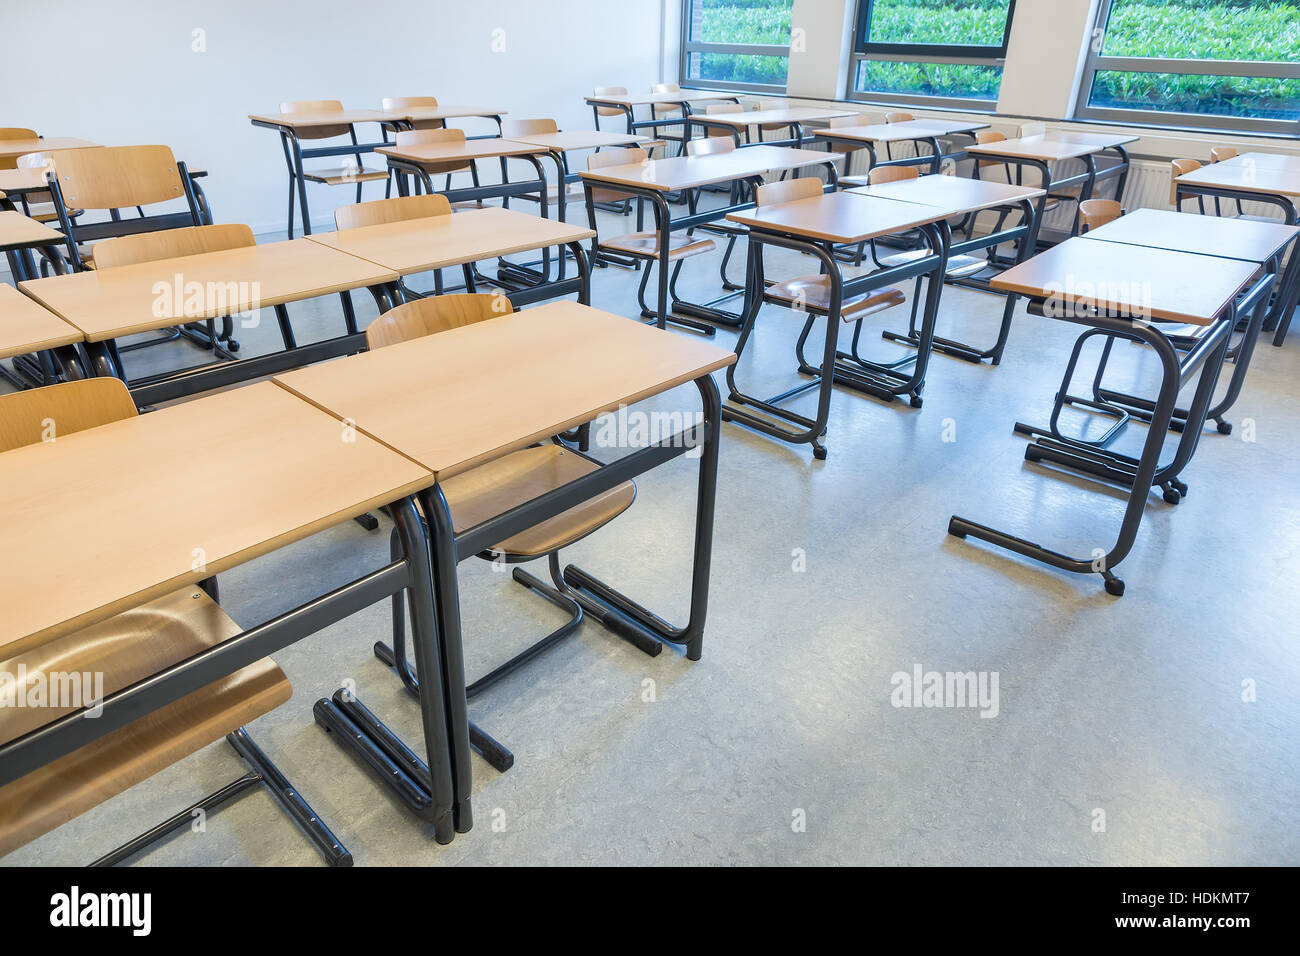 Rows of tables and chairs in classroom on high school Stock Photo